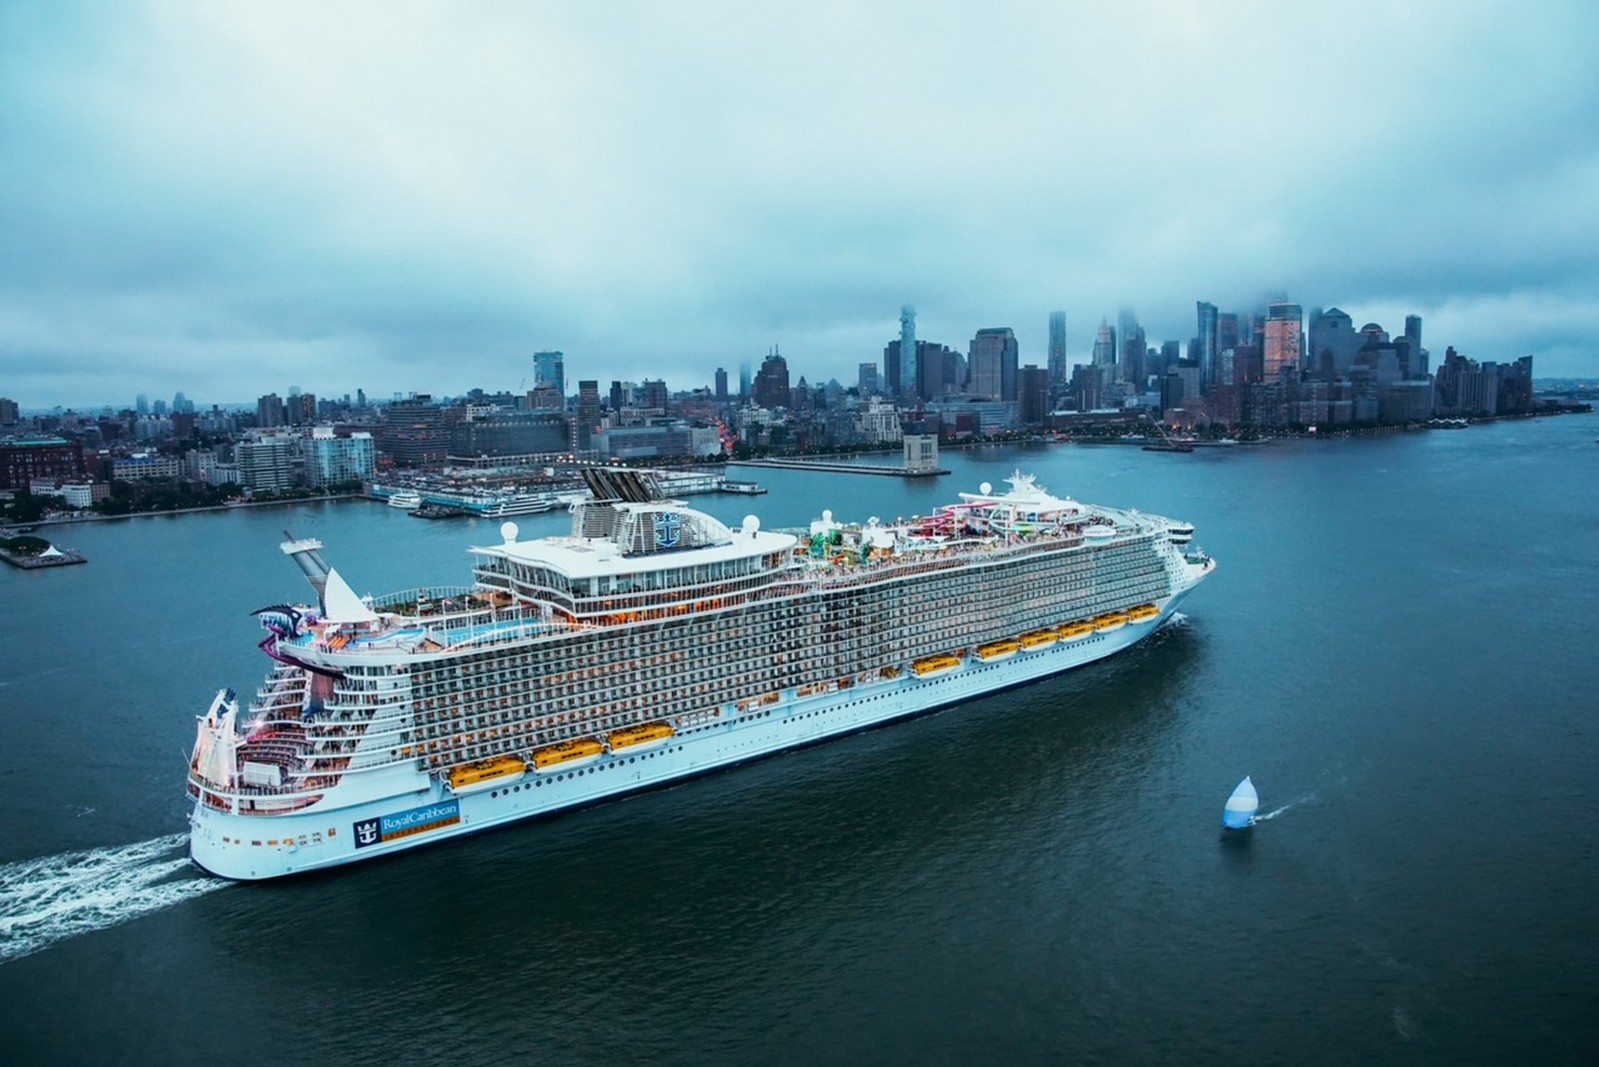 Oasis of the Seas sailing past New York